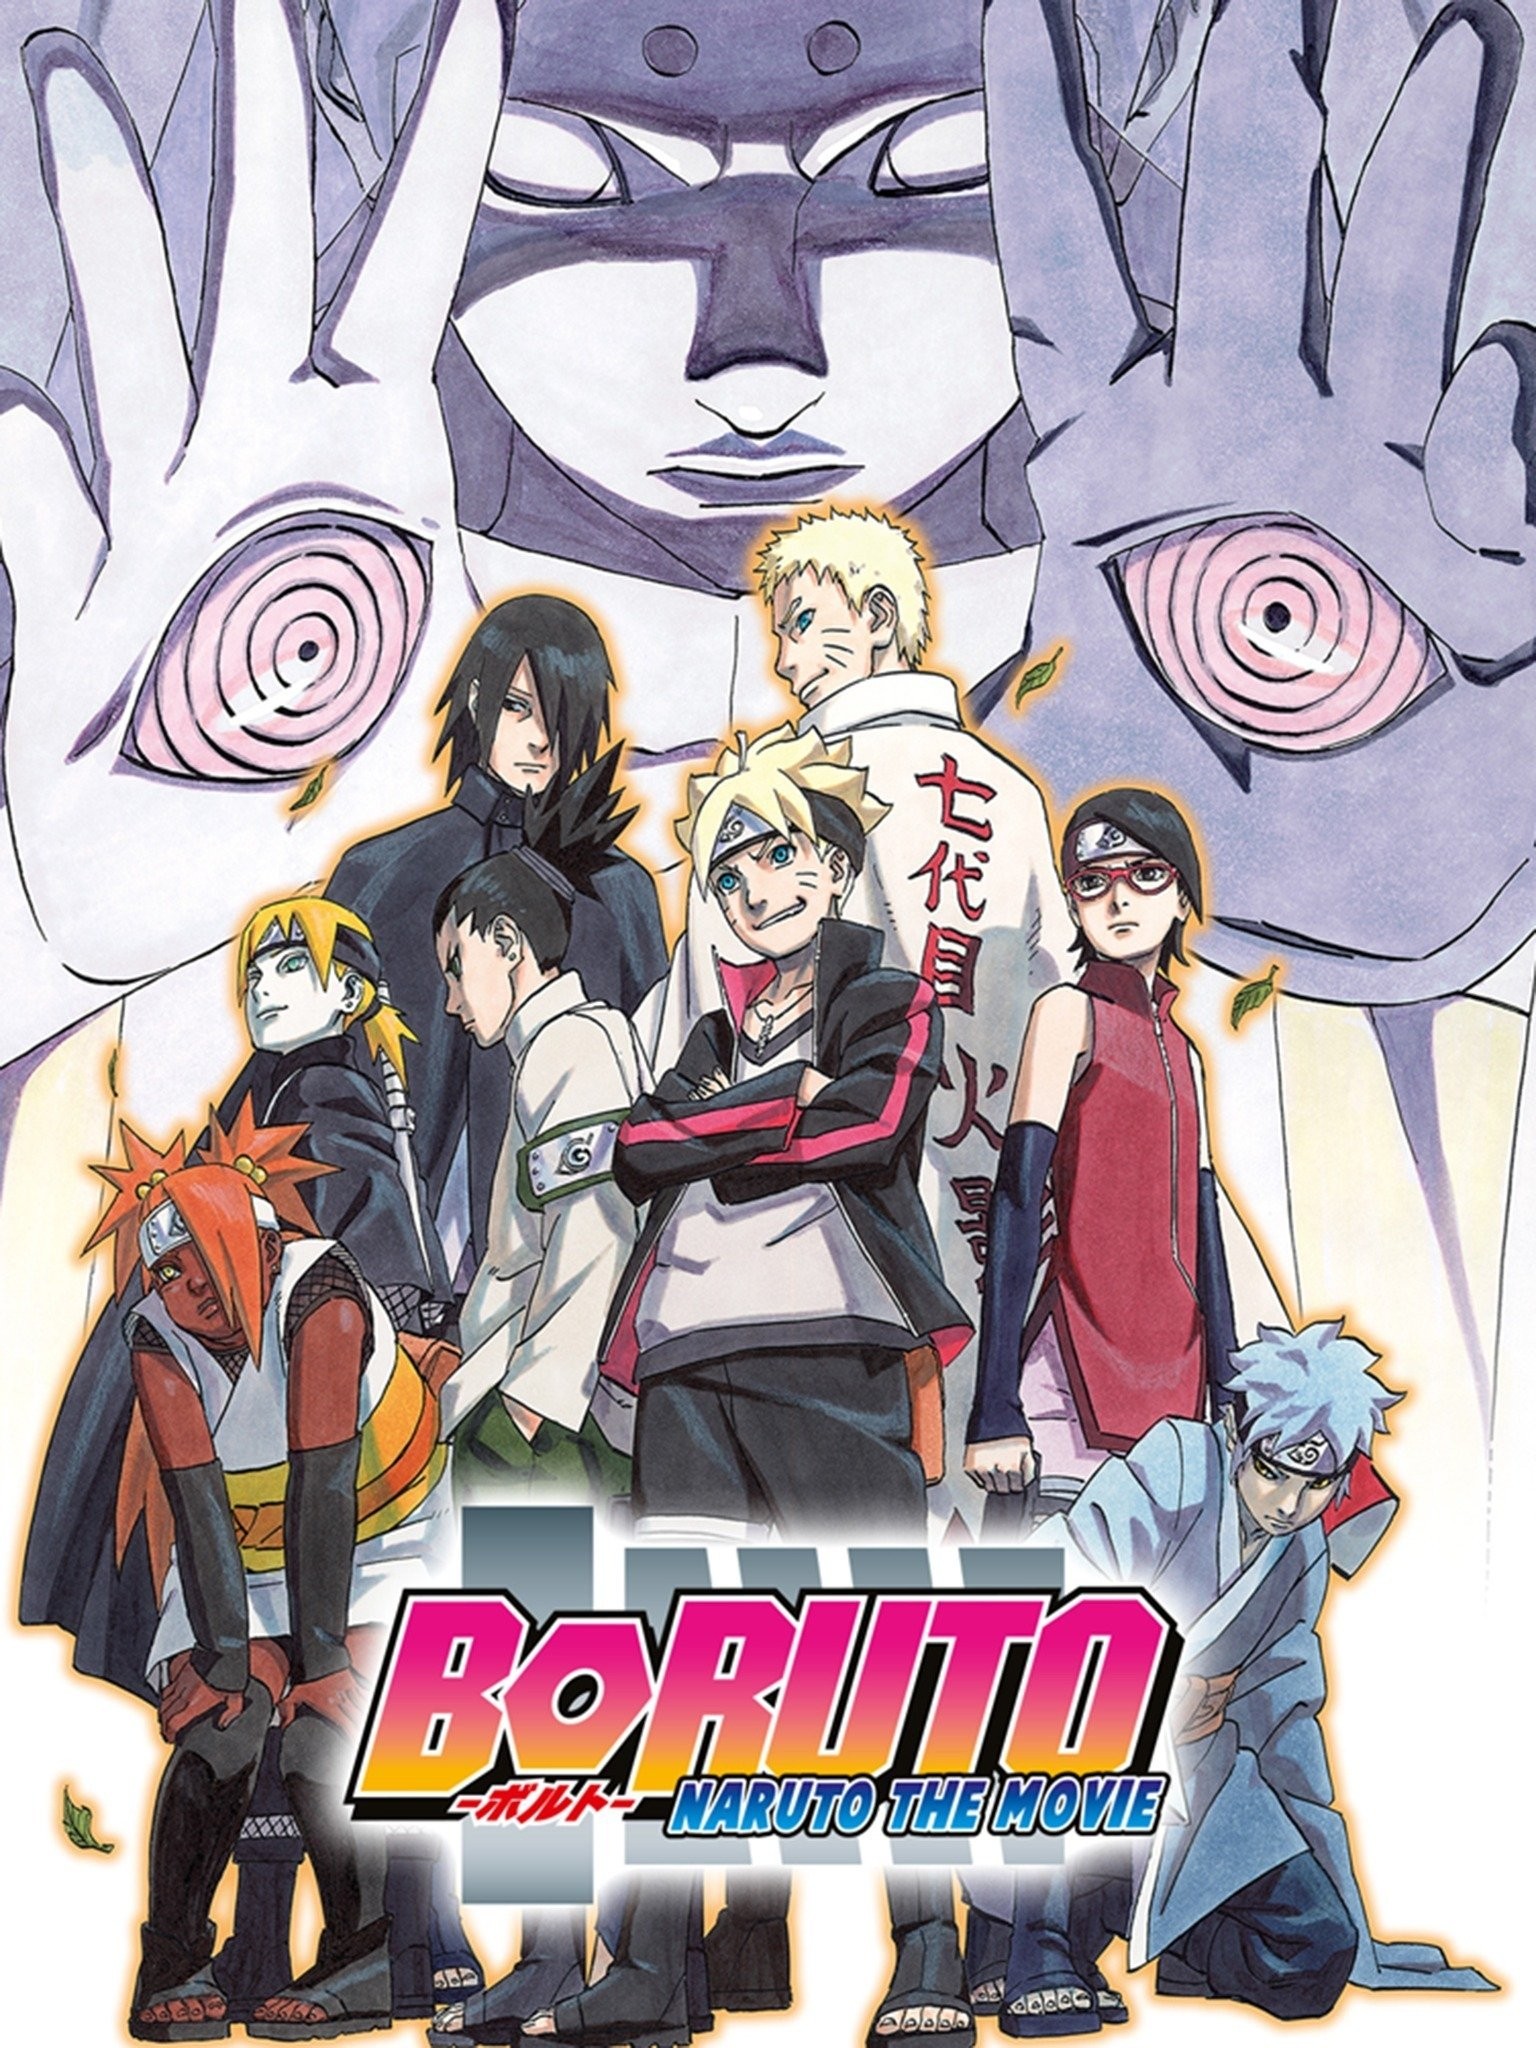 The Boruto Anime's Second Part Won't Begin With the Big Time Skip